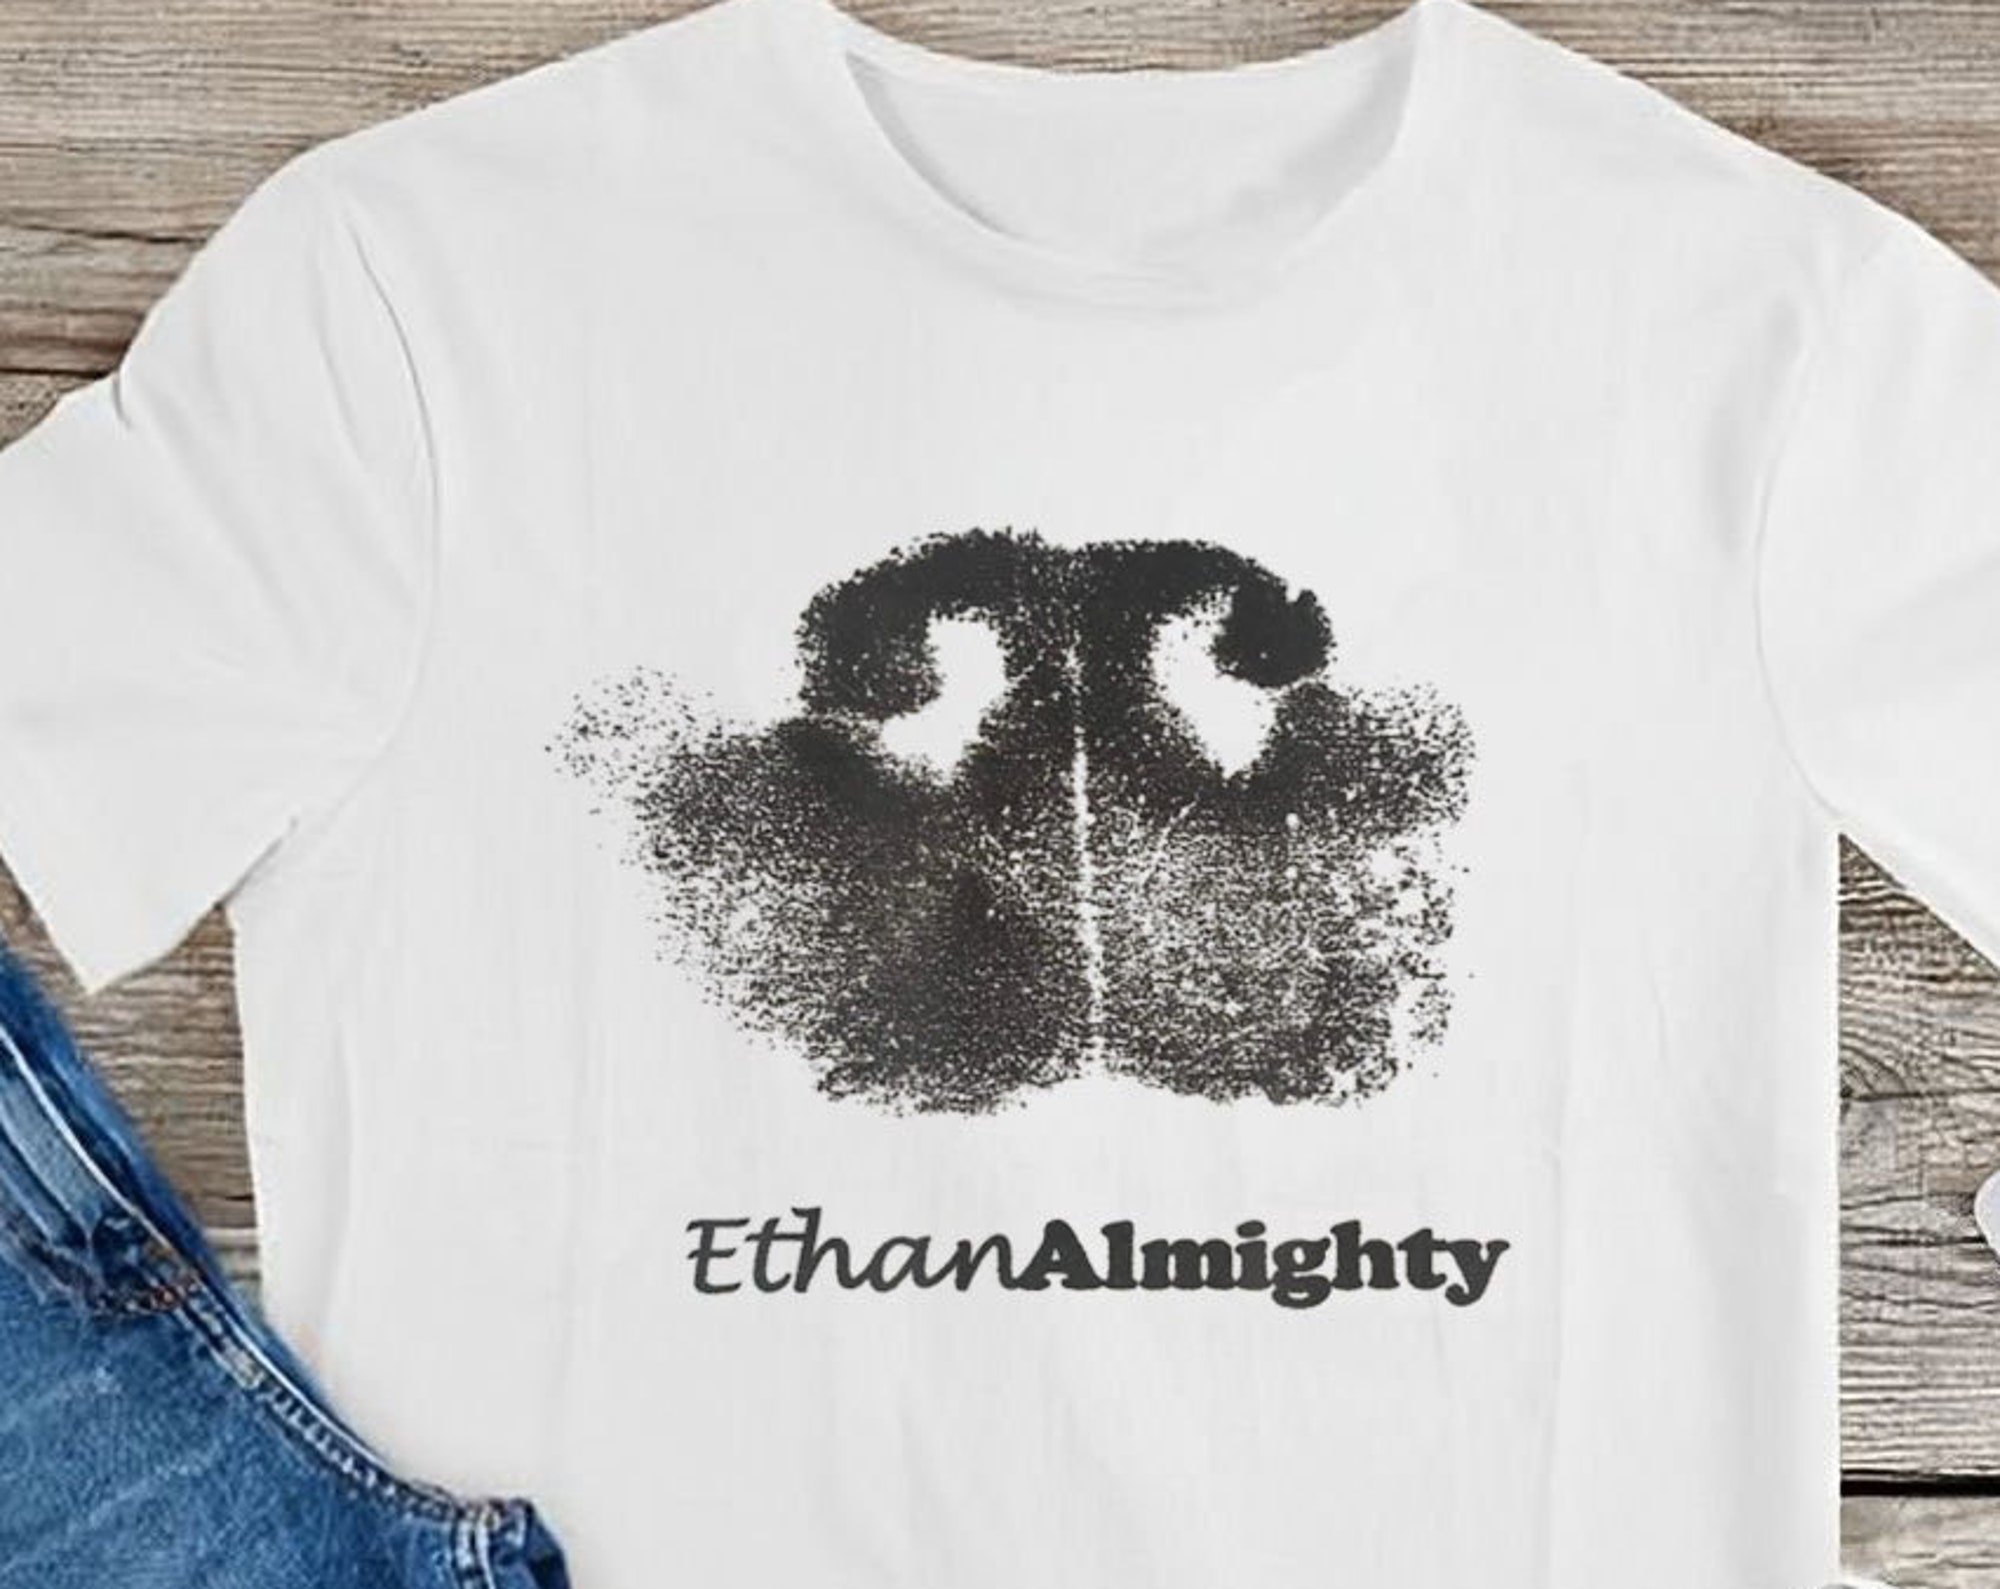 Discover Ethan Nose Print T-Shirt, Ethan Paw T-Shirt, Ethan Almighty Graphic , Funny T-Shirt, Dog Tie-Dye, Gift Dad, Mom